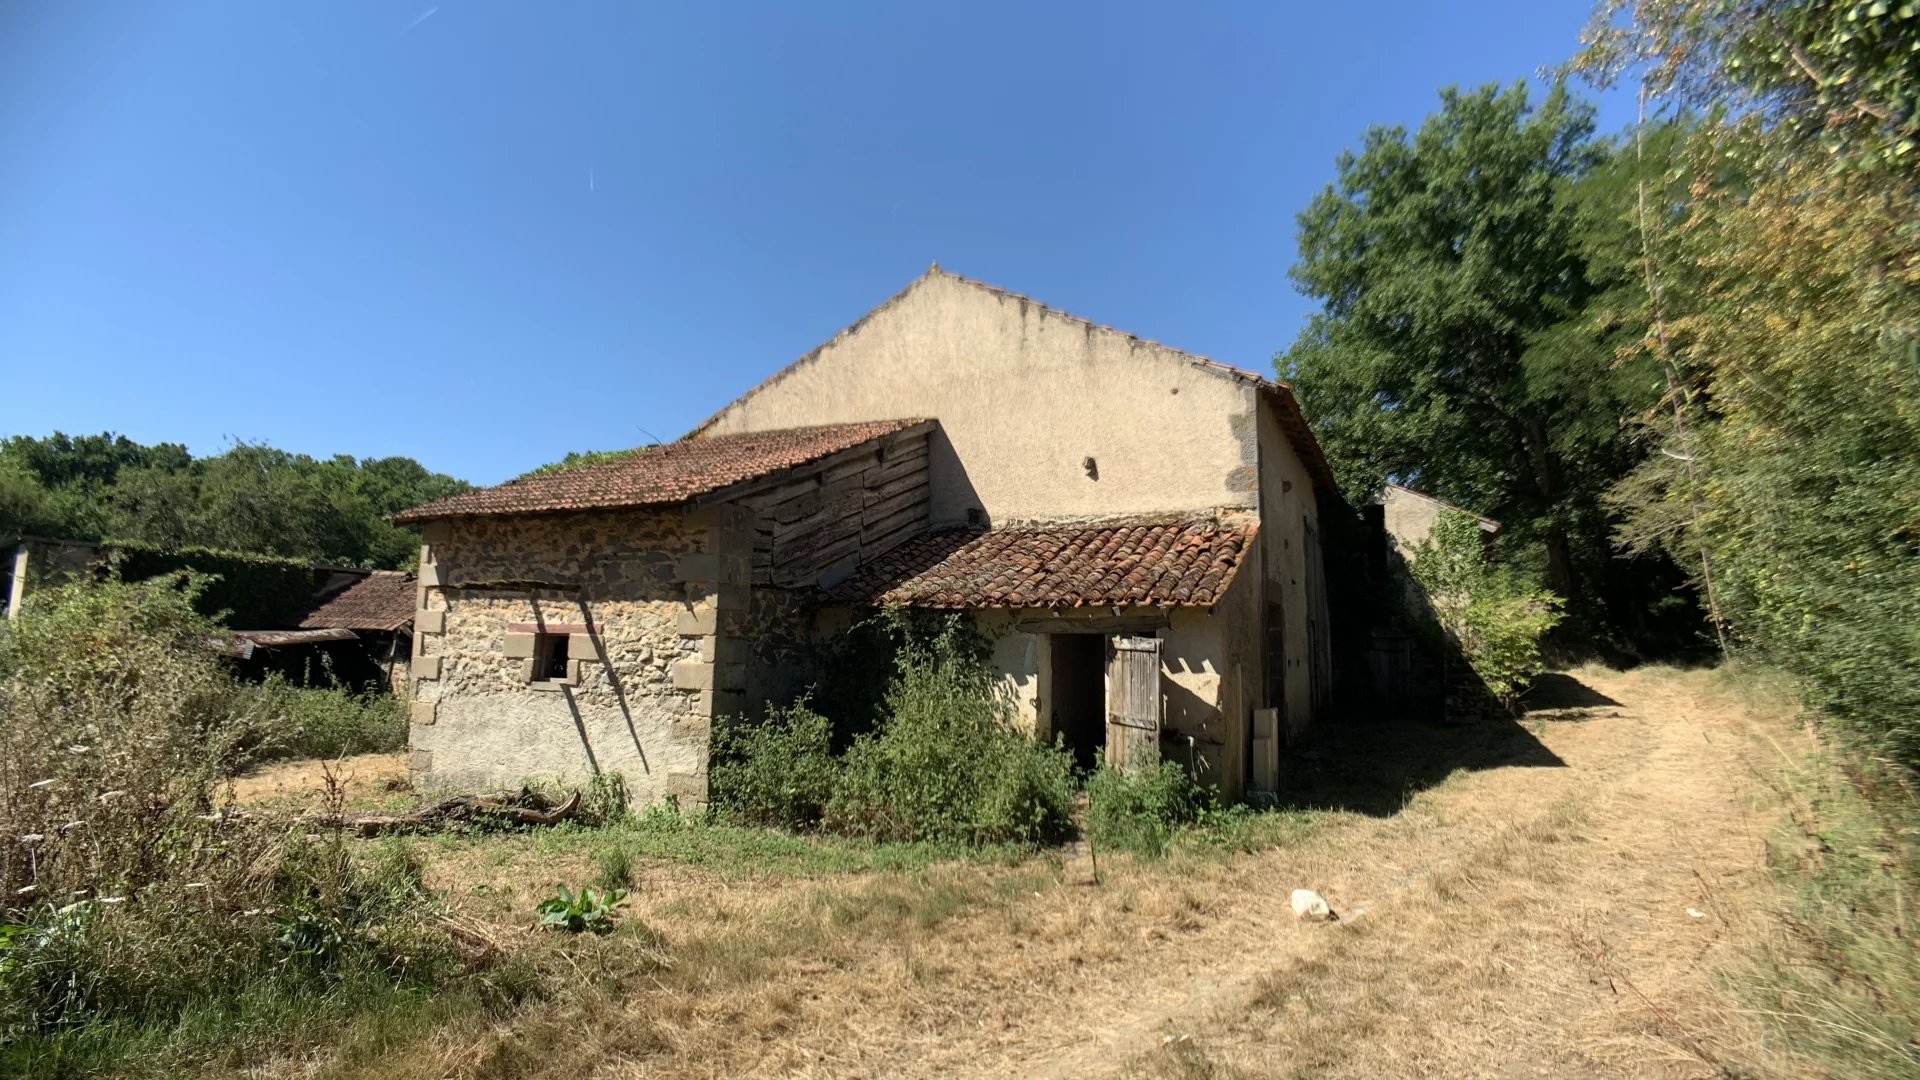 Renovation project in quiet area of France